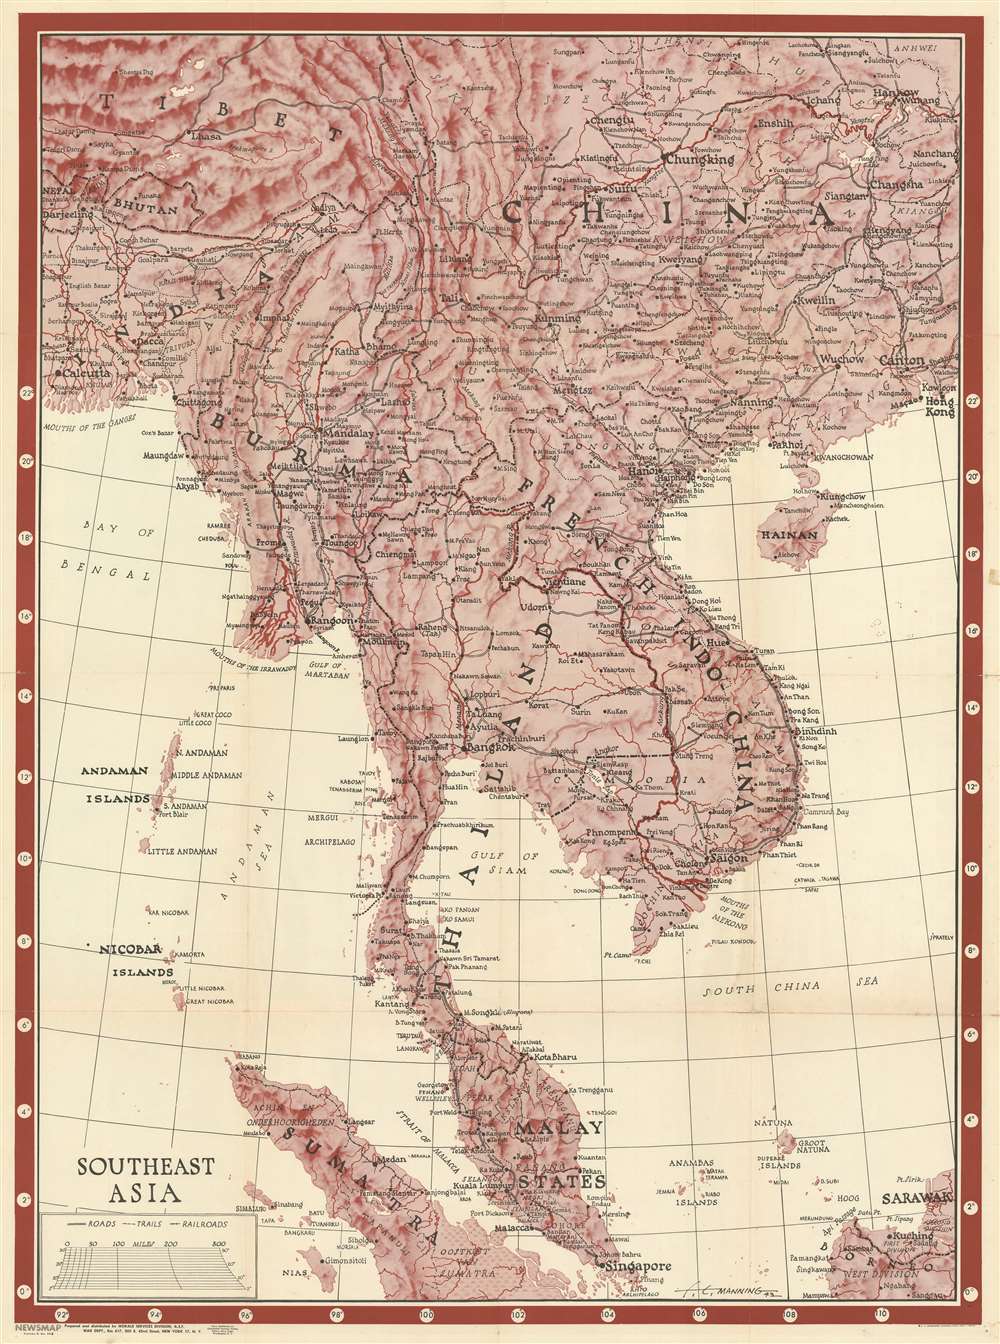 Southeast Asia. Newsmap. Monday, January 17, 1944. Week of January 6 to January 13. 227th Week of the War - 109th Week of U.S. Participation. Volume II No. 39F. - Main View